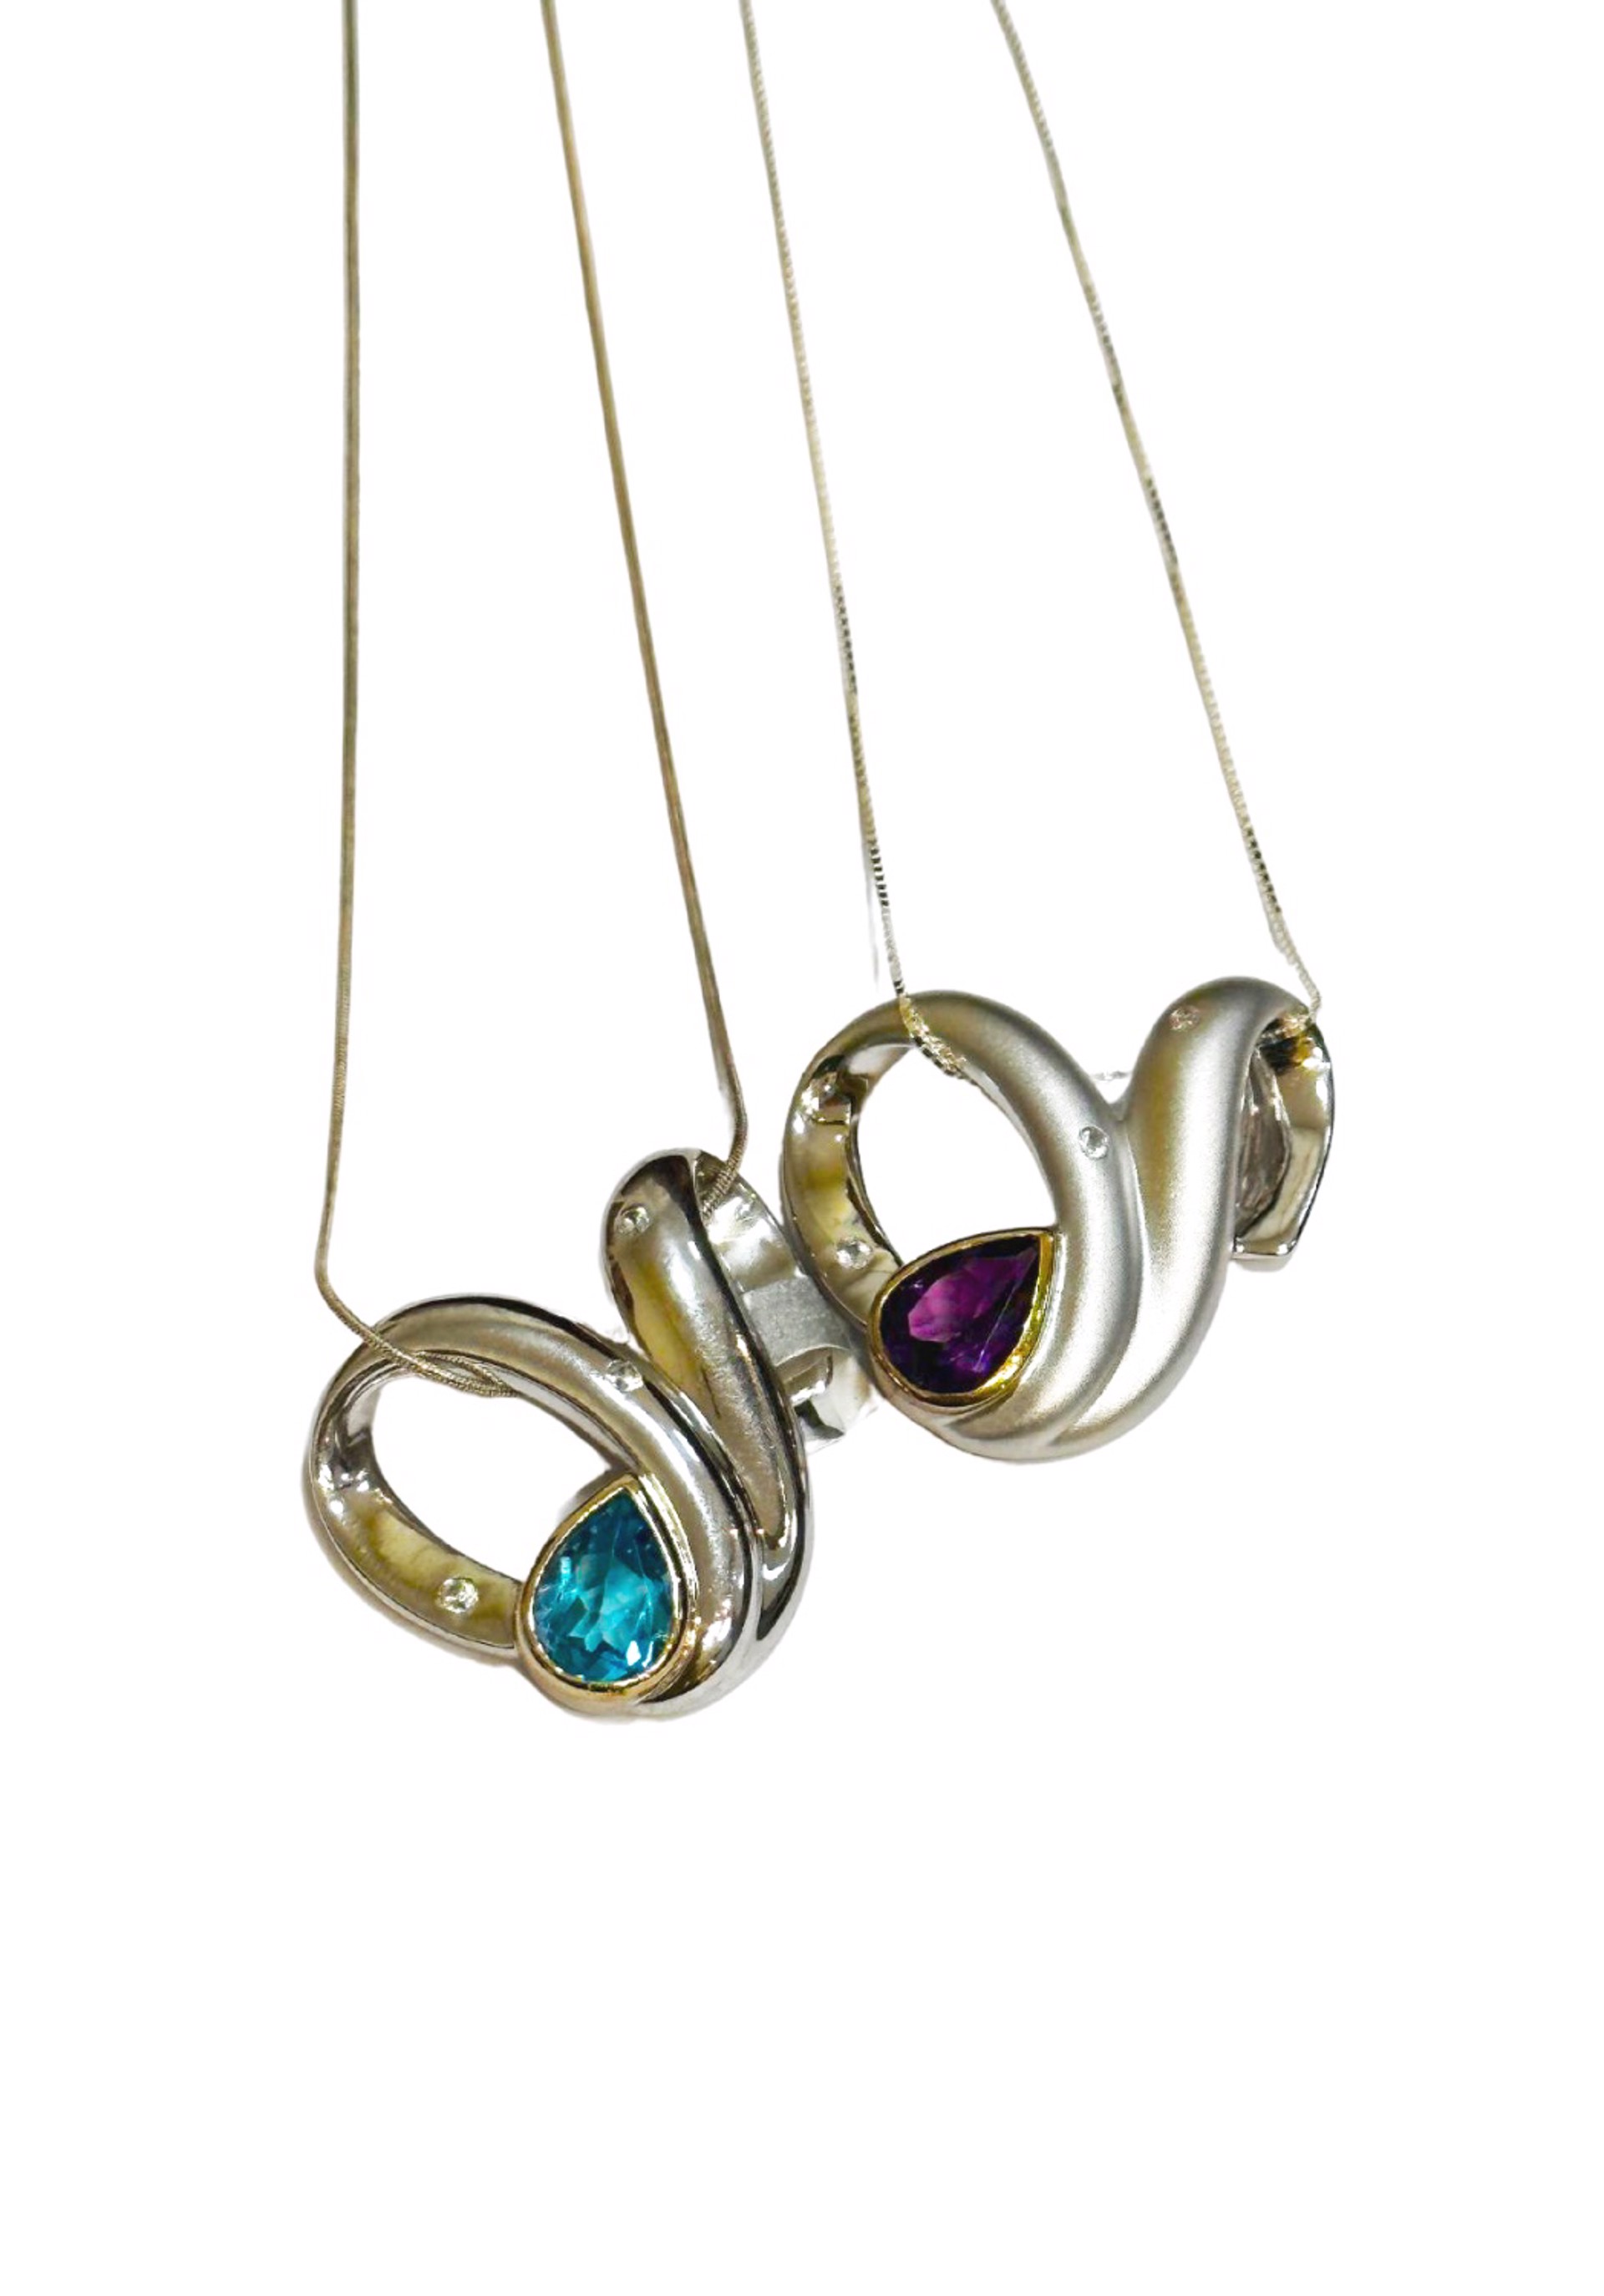 Pendant - Silver Swirl with Gemstones and 14kt Gold Surround by Joryel Vera